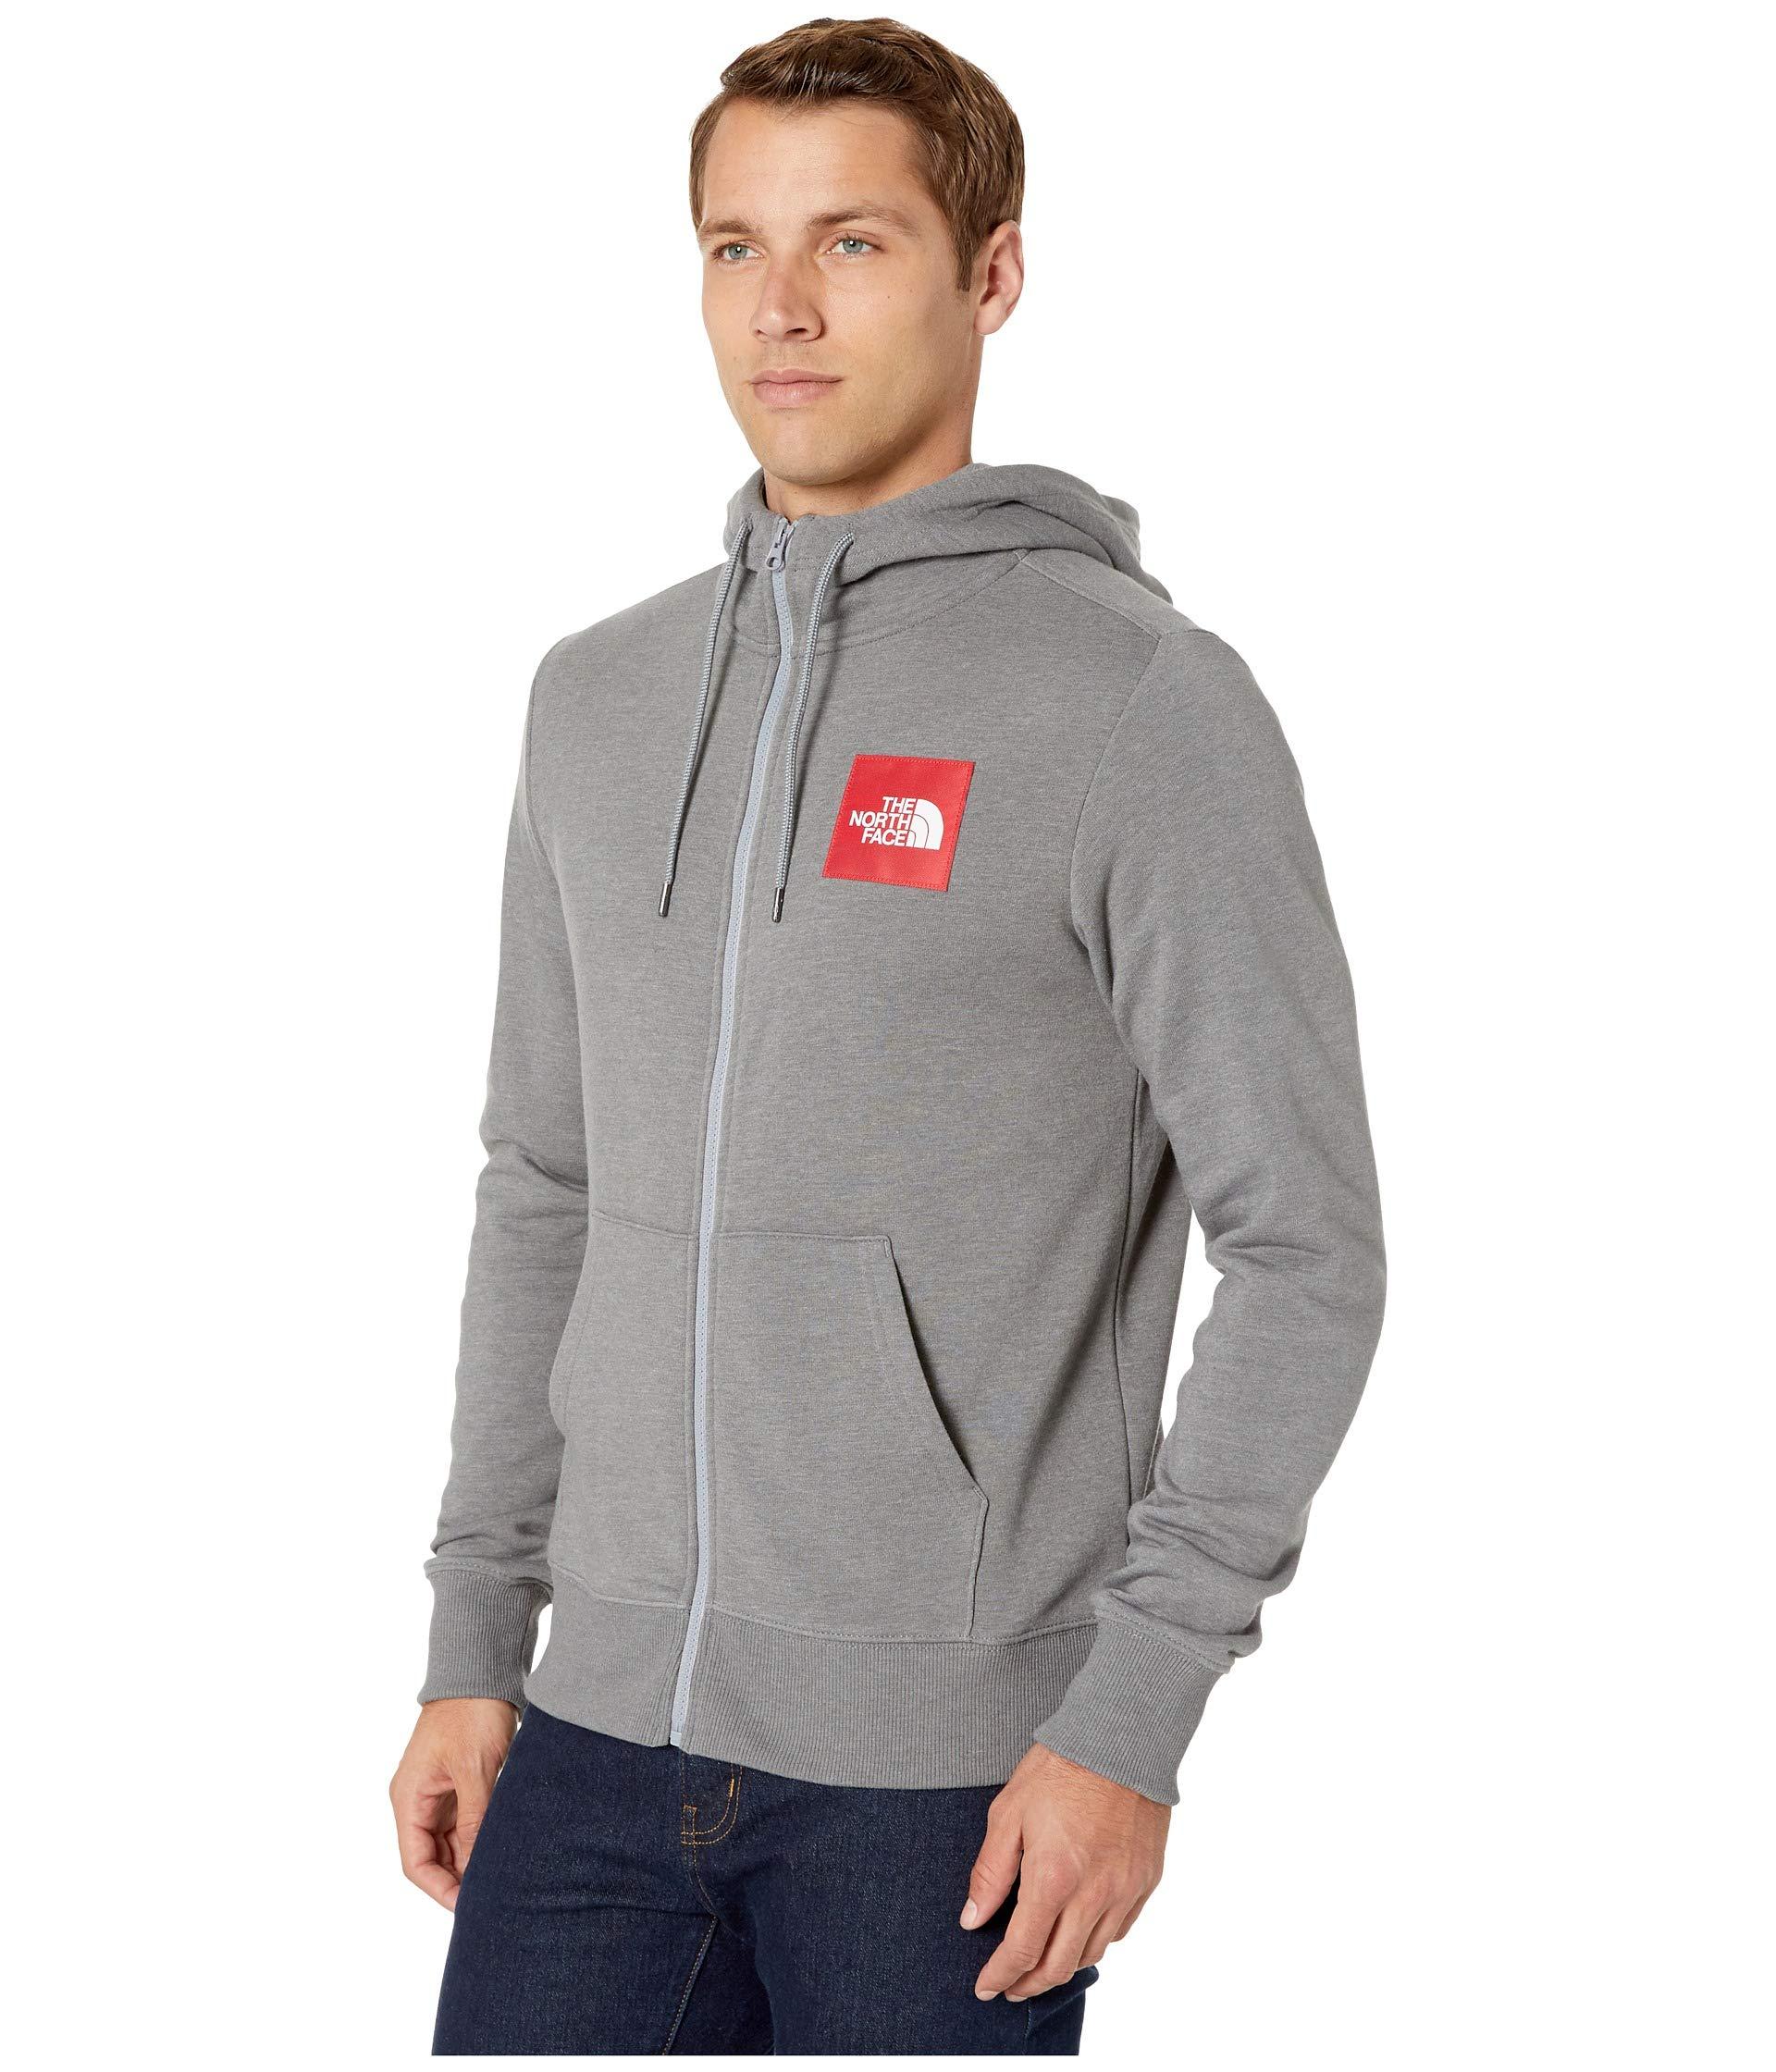 The North Face Red Box Patch Full Zip Hoodie in Gray for Men - Lyst